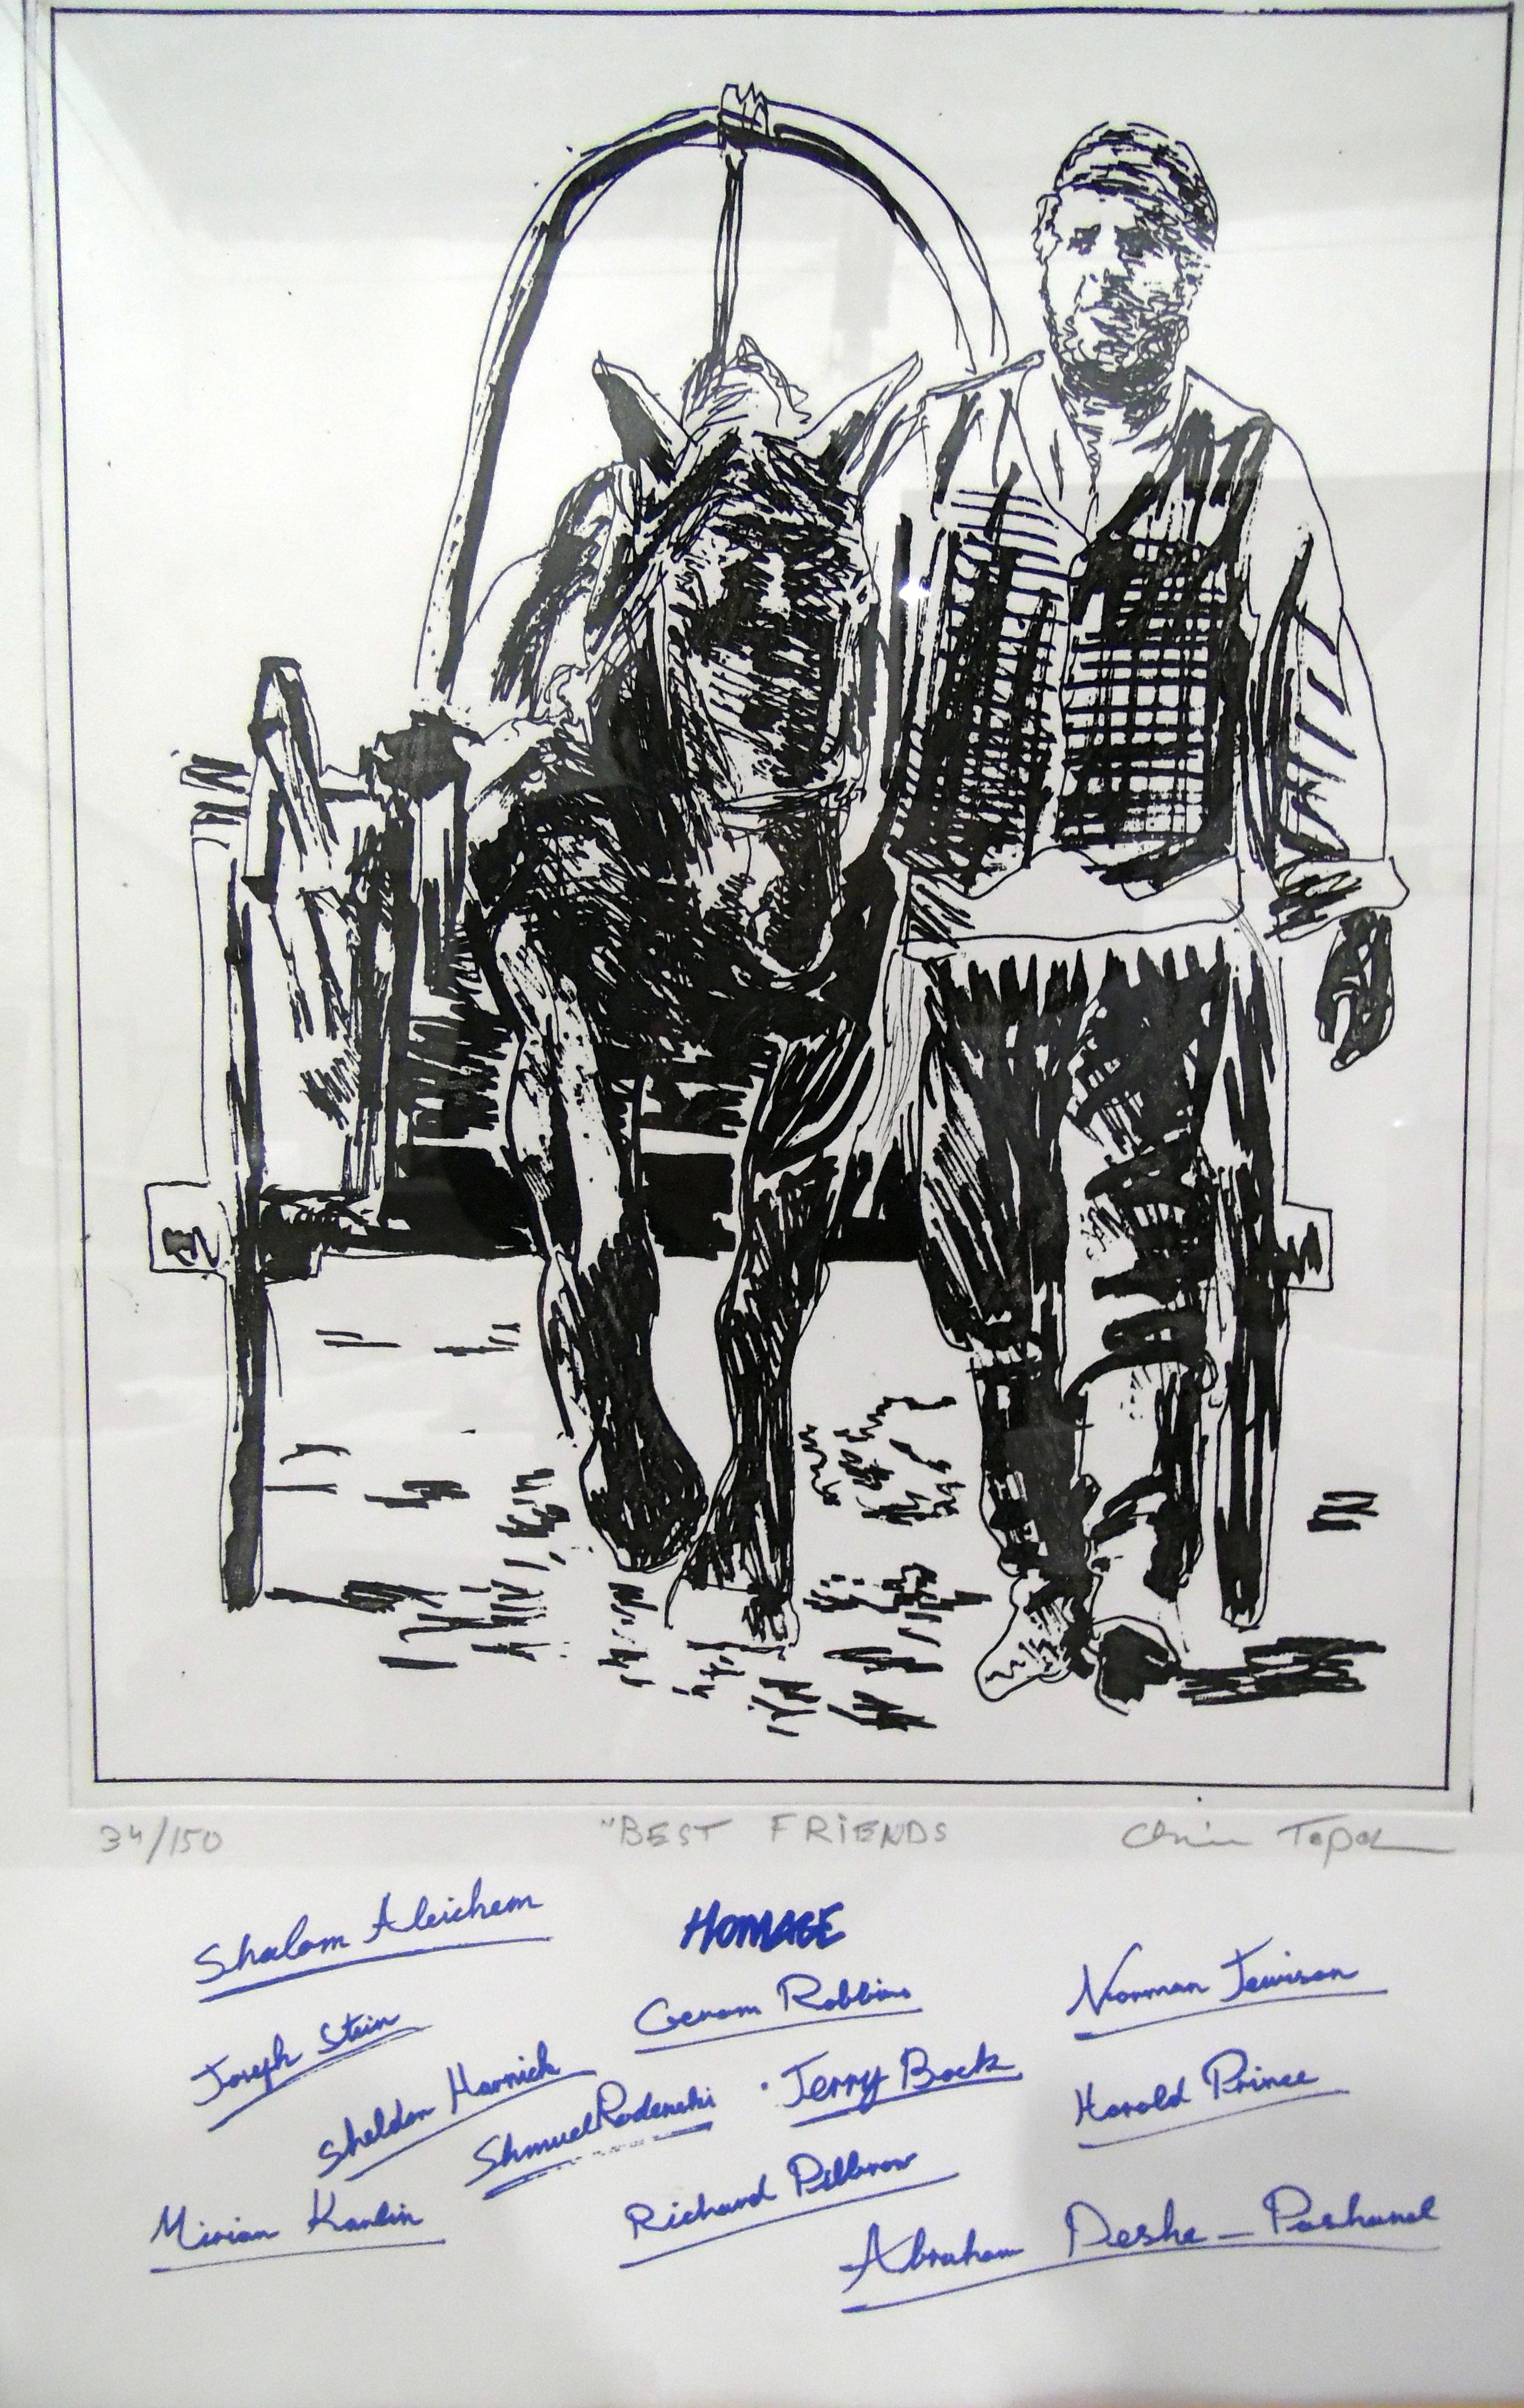 After Chaim Topol Limited edition etching "Best Friends", - Image 2 of 2